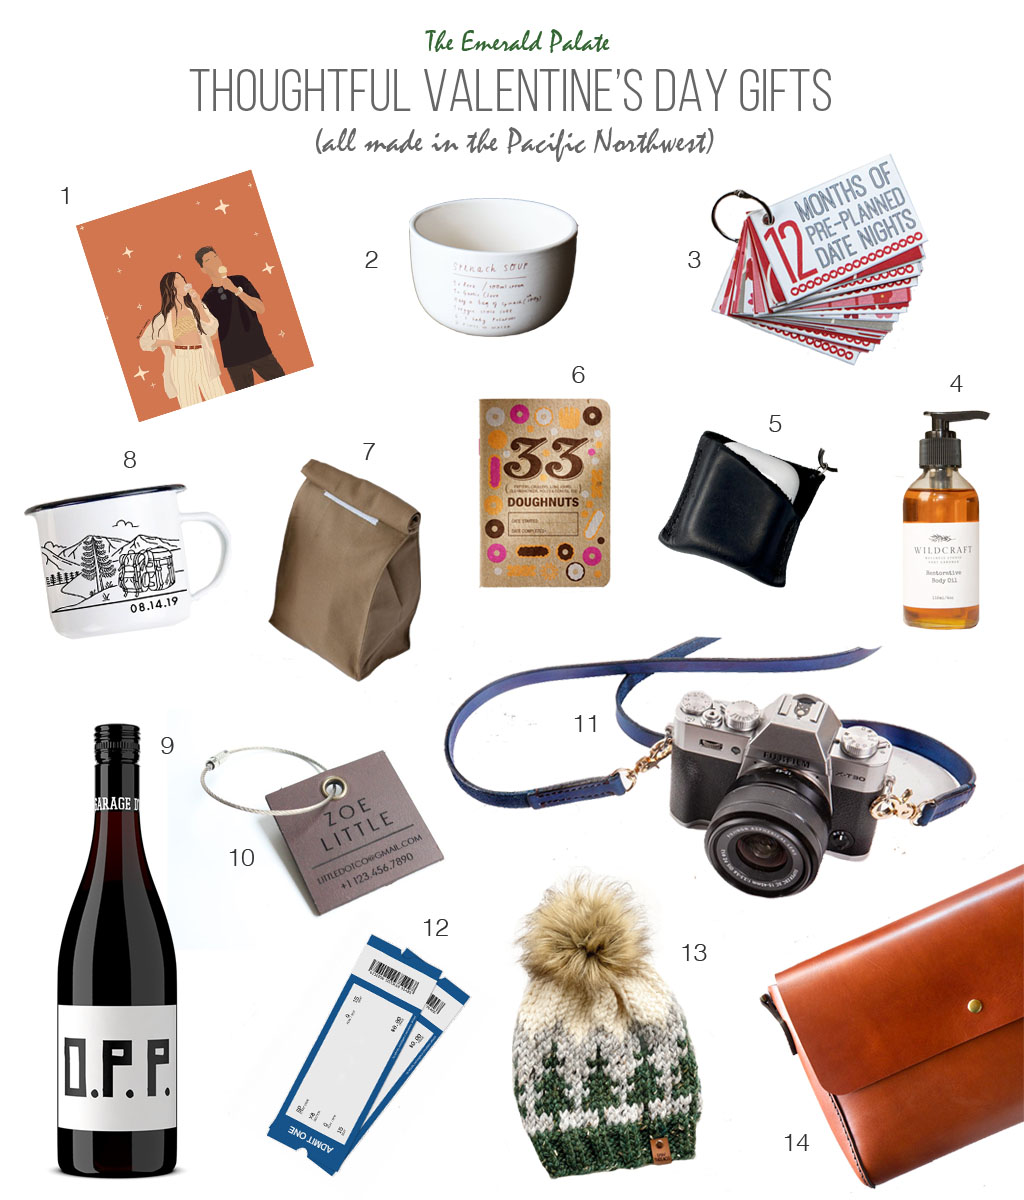 Collage of 14 thoughtful Valentine's Day gift ideas for him and her, all made in the Pacific Northwest